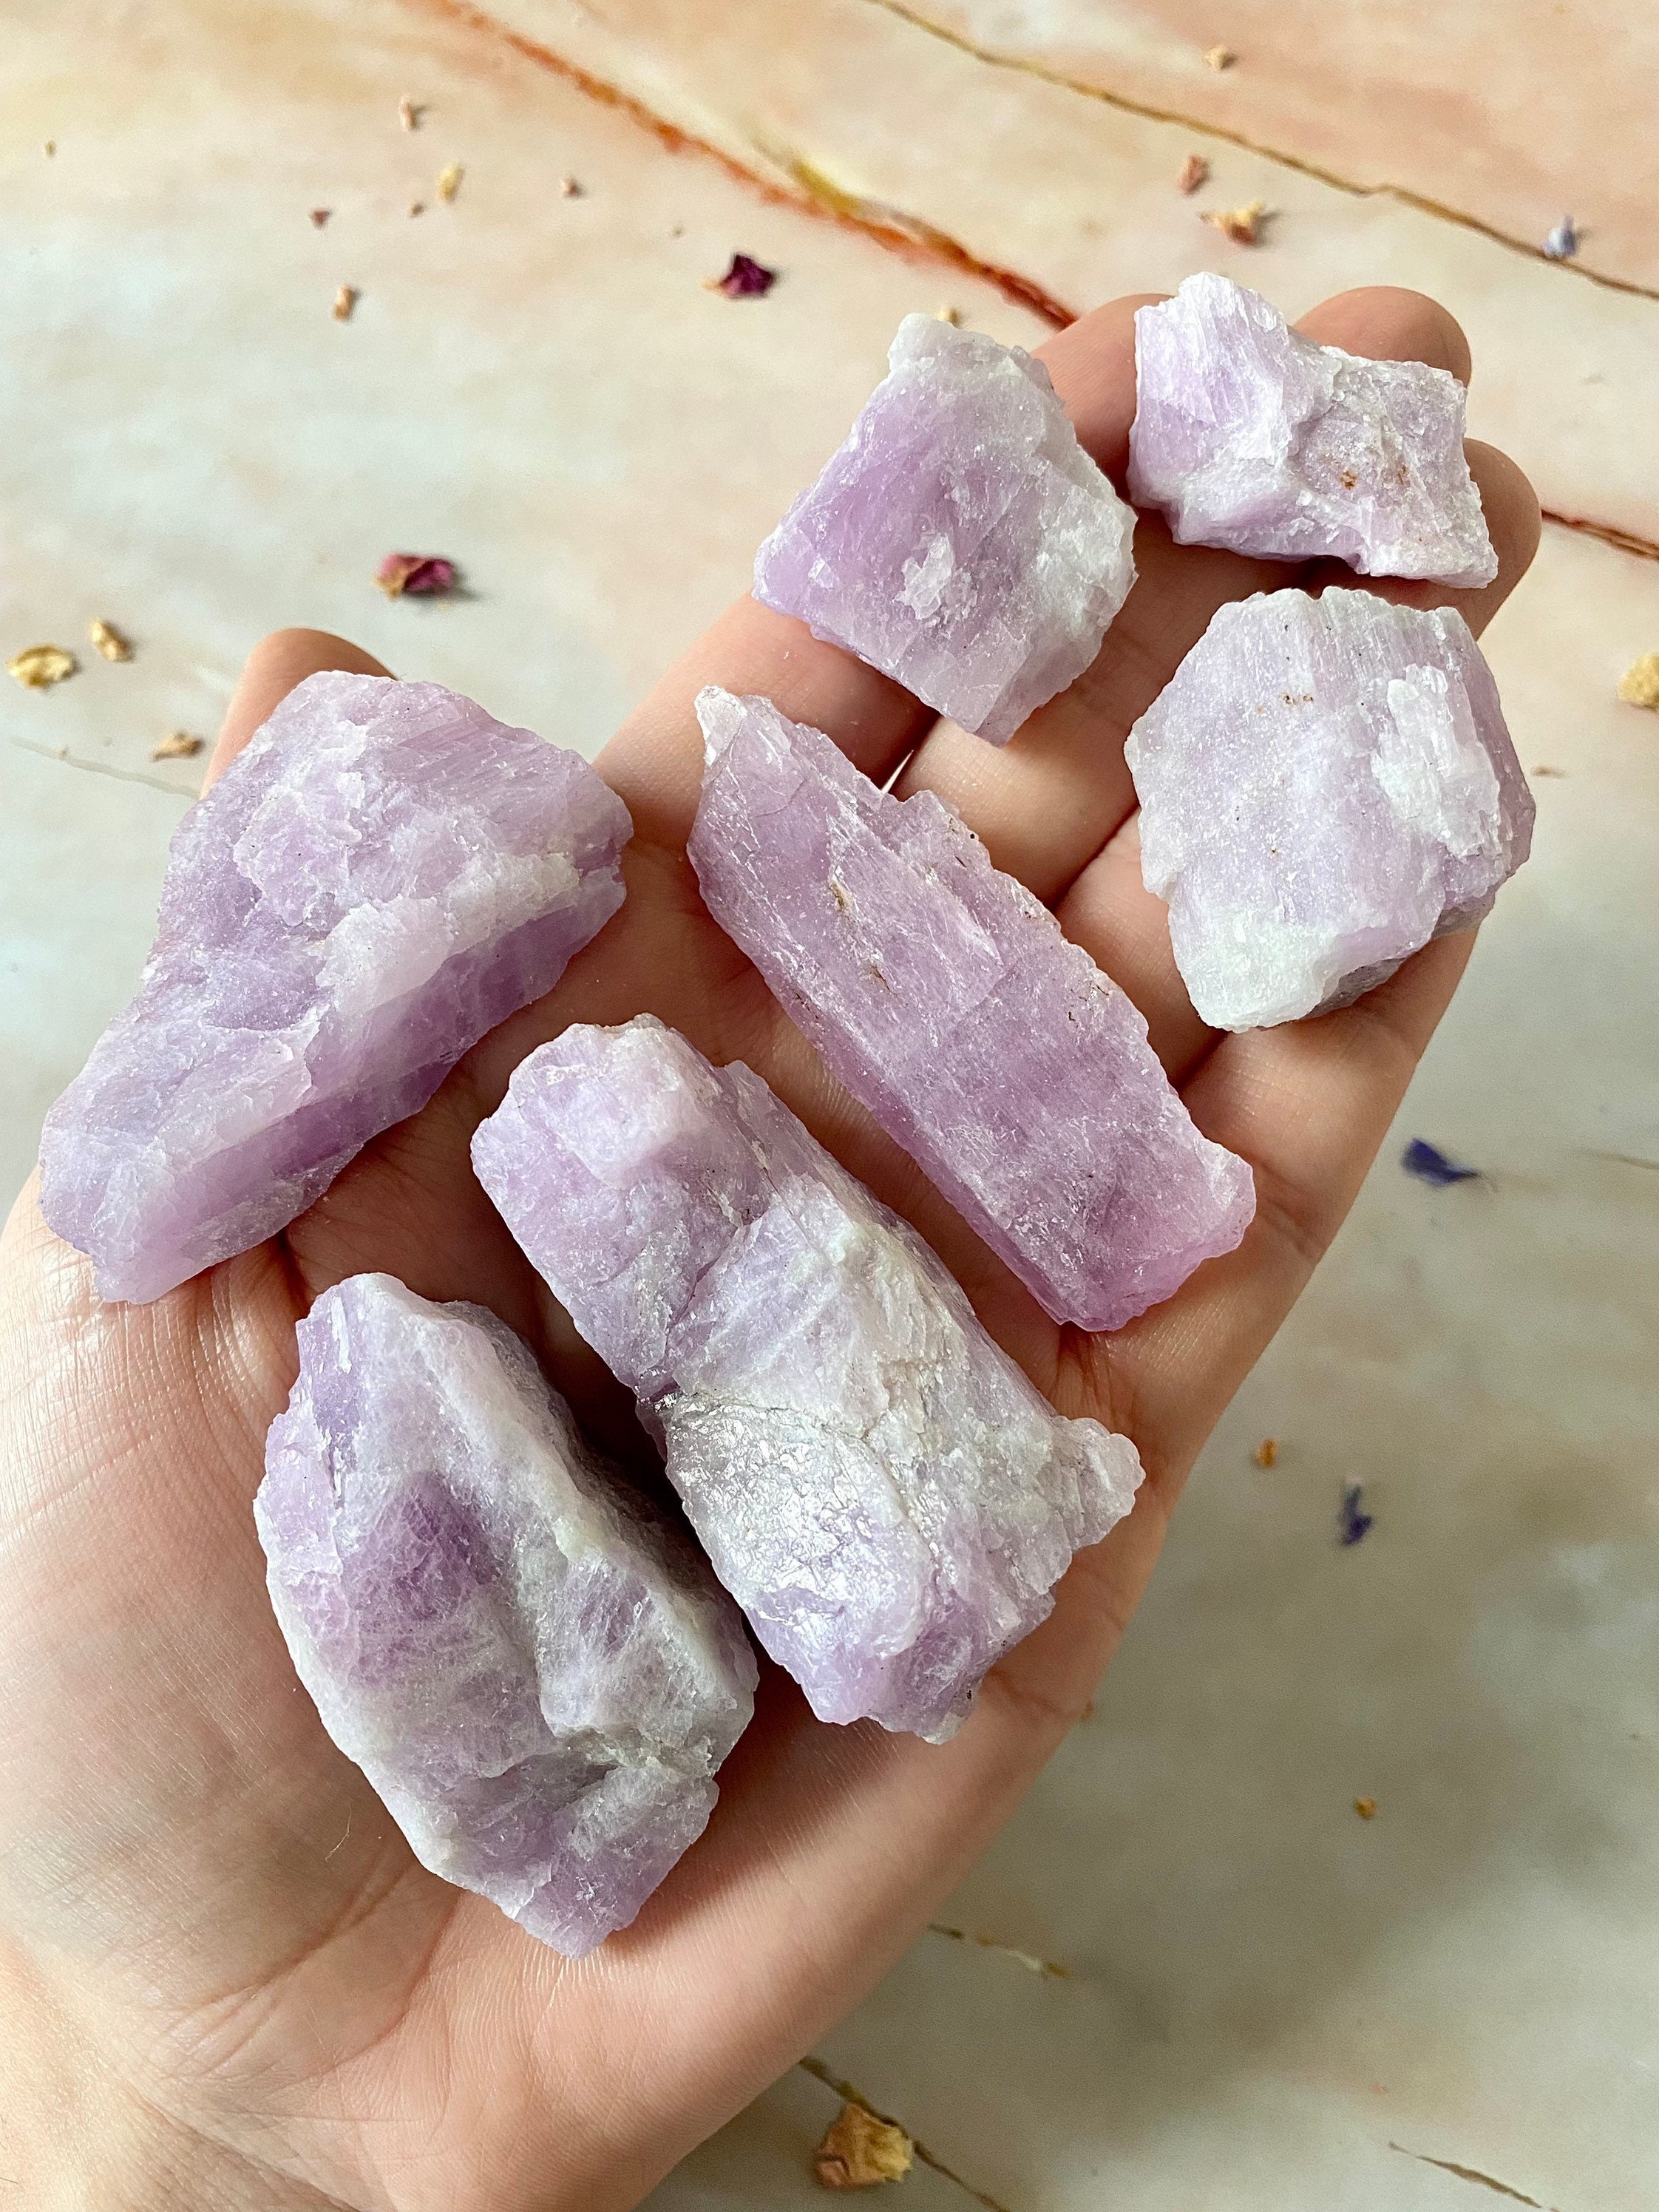 Kunzite crystal all natural drilled for stringing 3-15mm 25 pieces per winner 